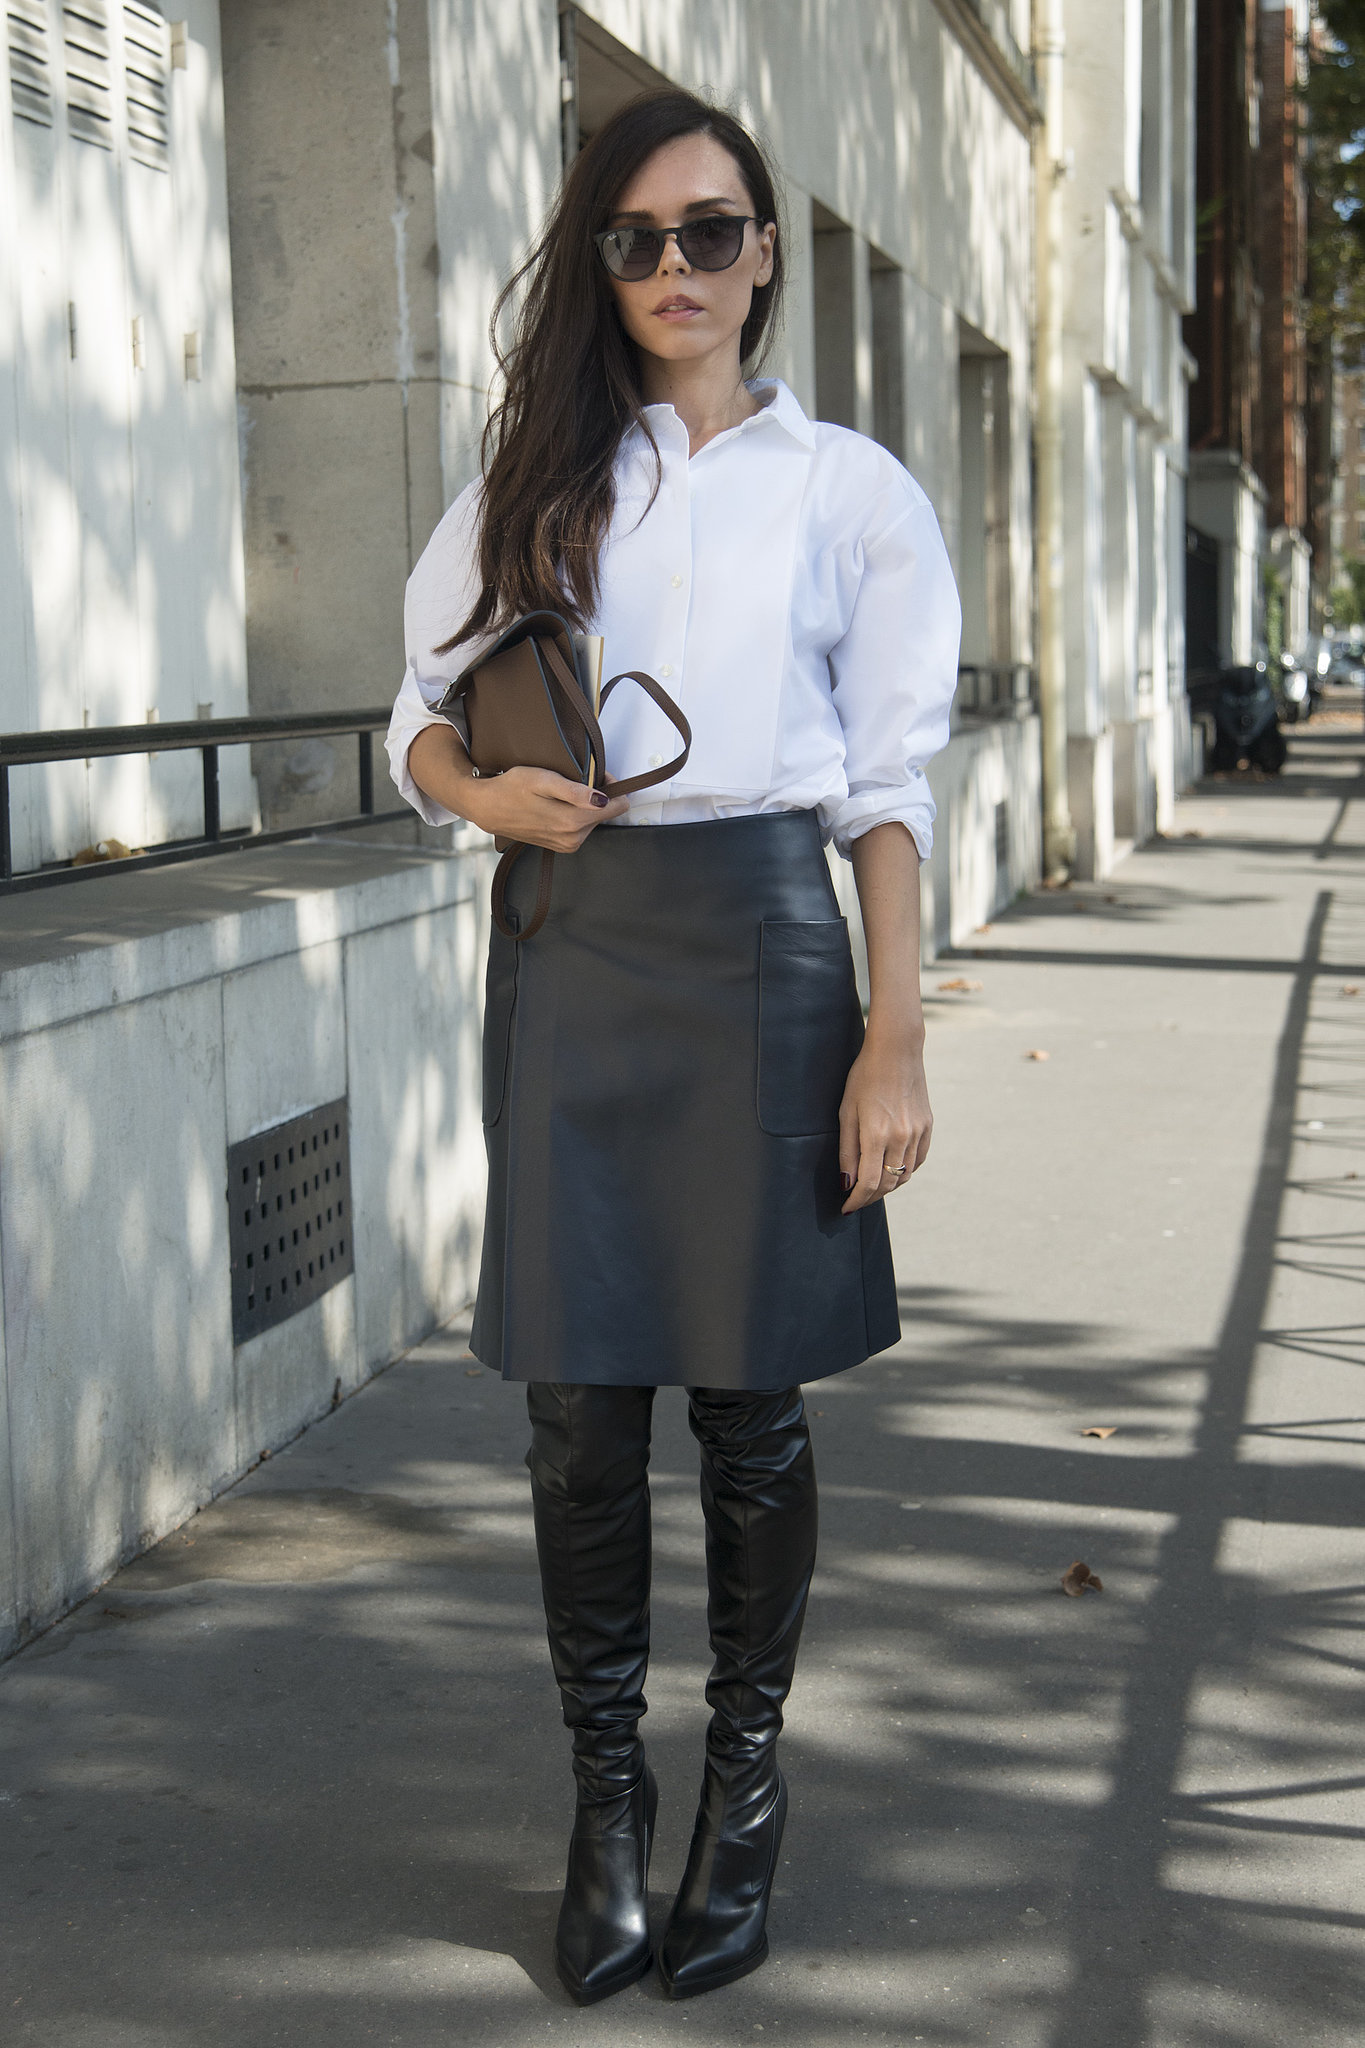 Add Leather Boots | 9 Ways to Wear Leather Like a Pro at the Office ...